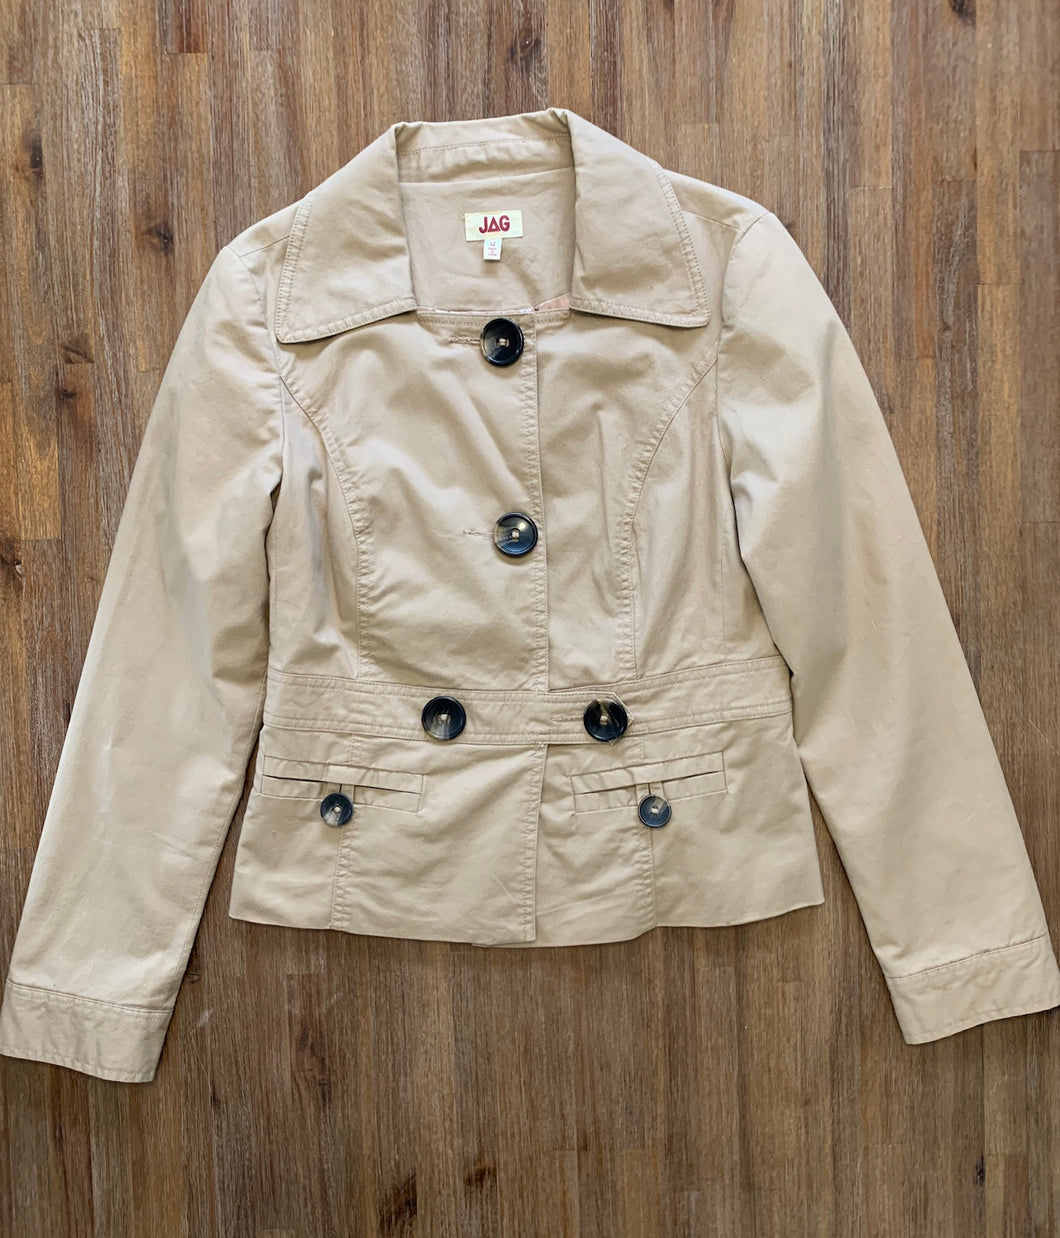 JAG Size 12 Light Brown Button Jacket Wome n's